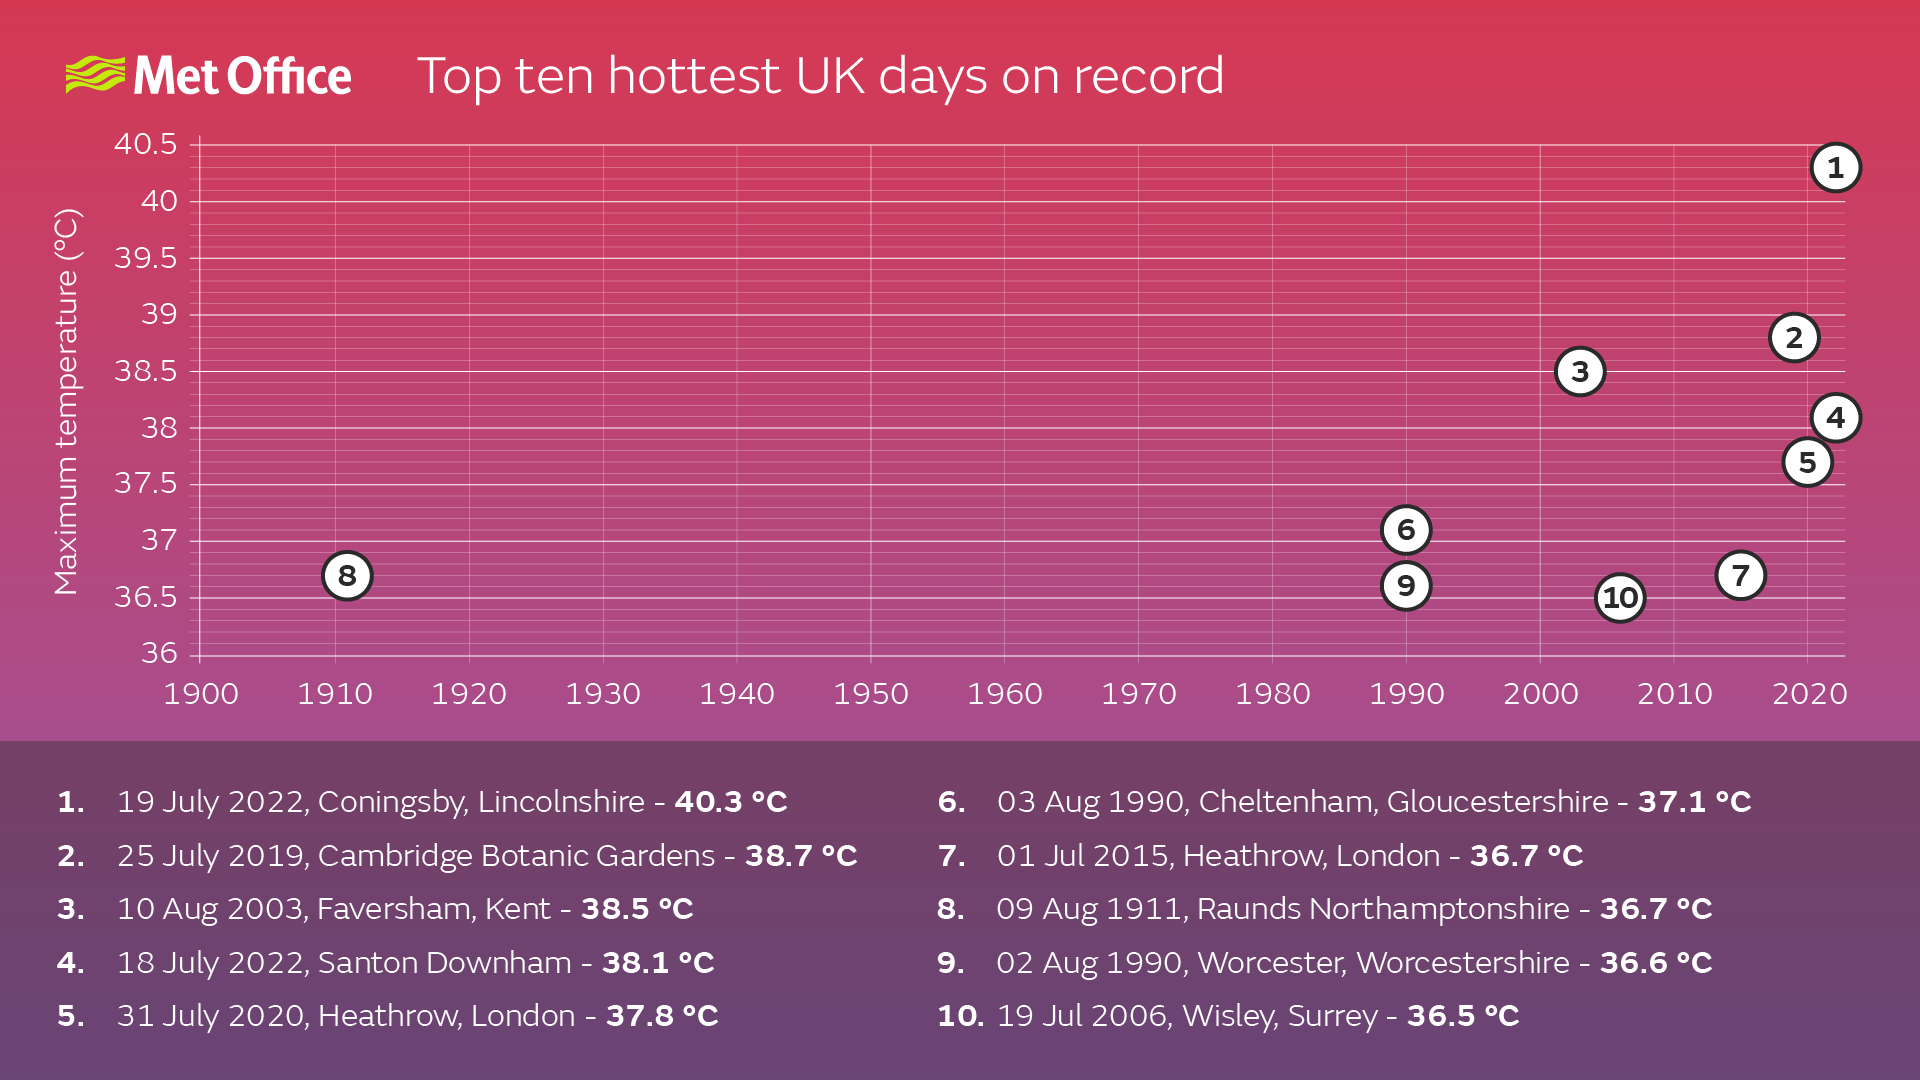 Top 10 hottest days on UK record